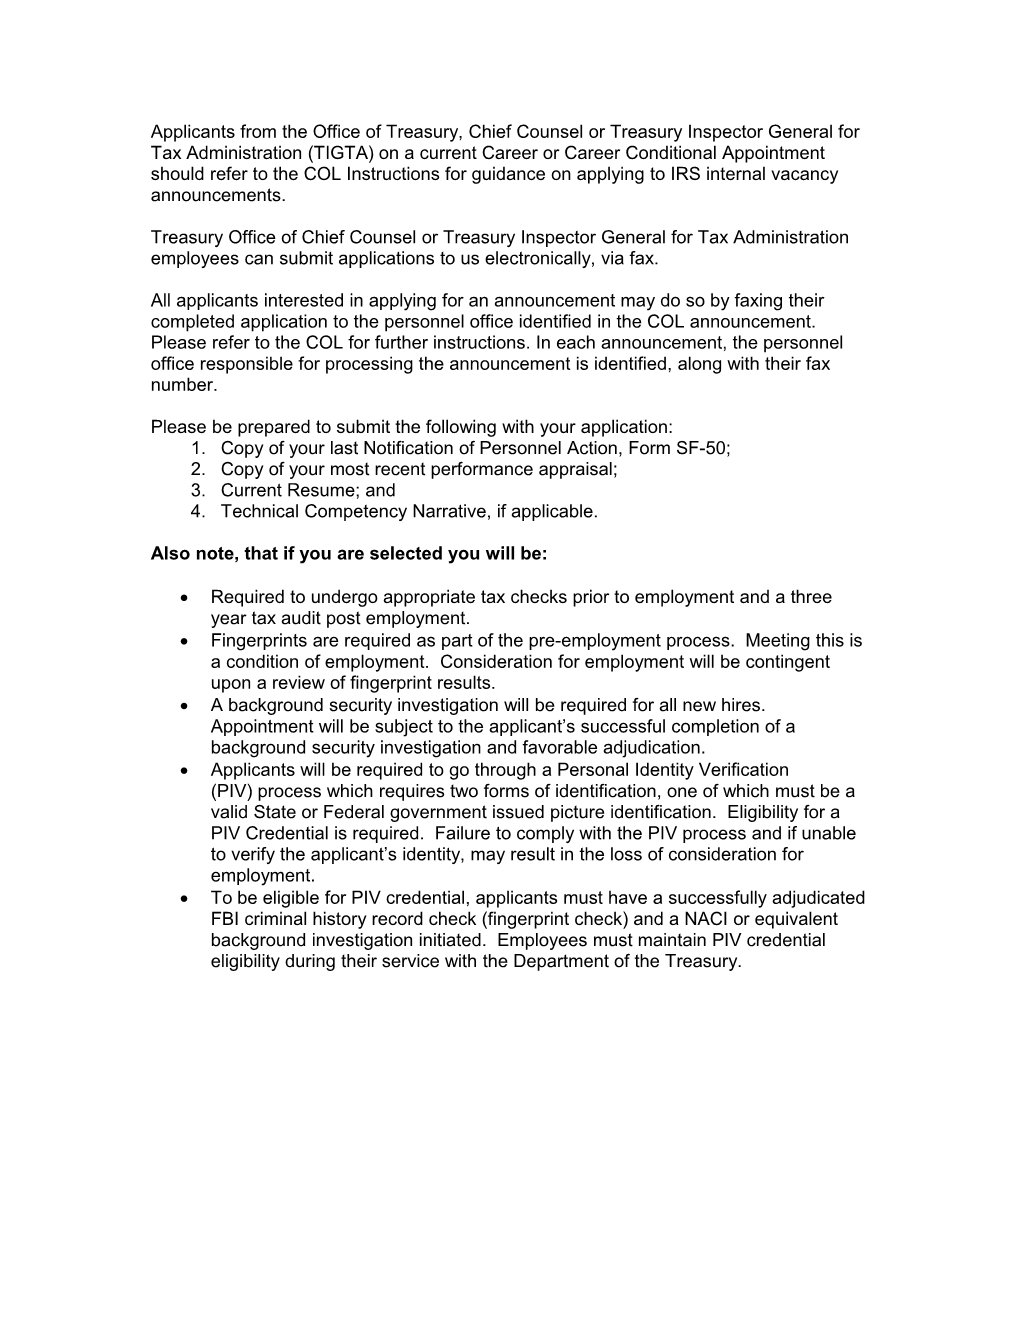 Conditions of Employment for TIGTA and Treasury Office of Chief Counsel Employees Applying